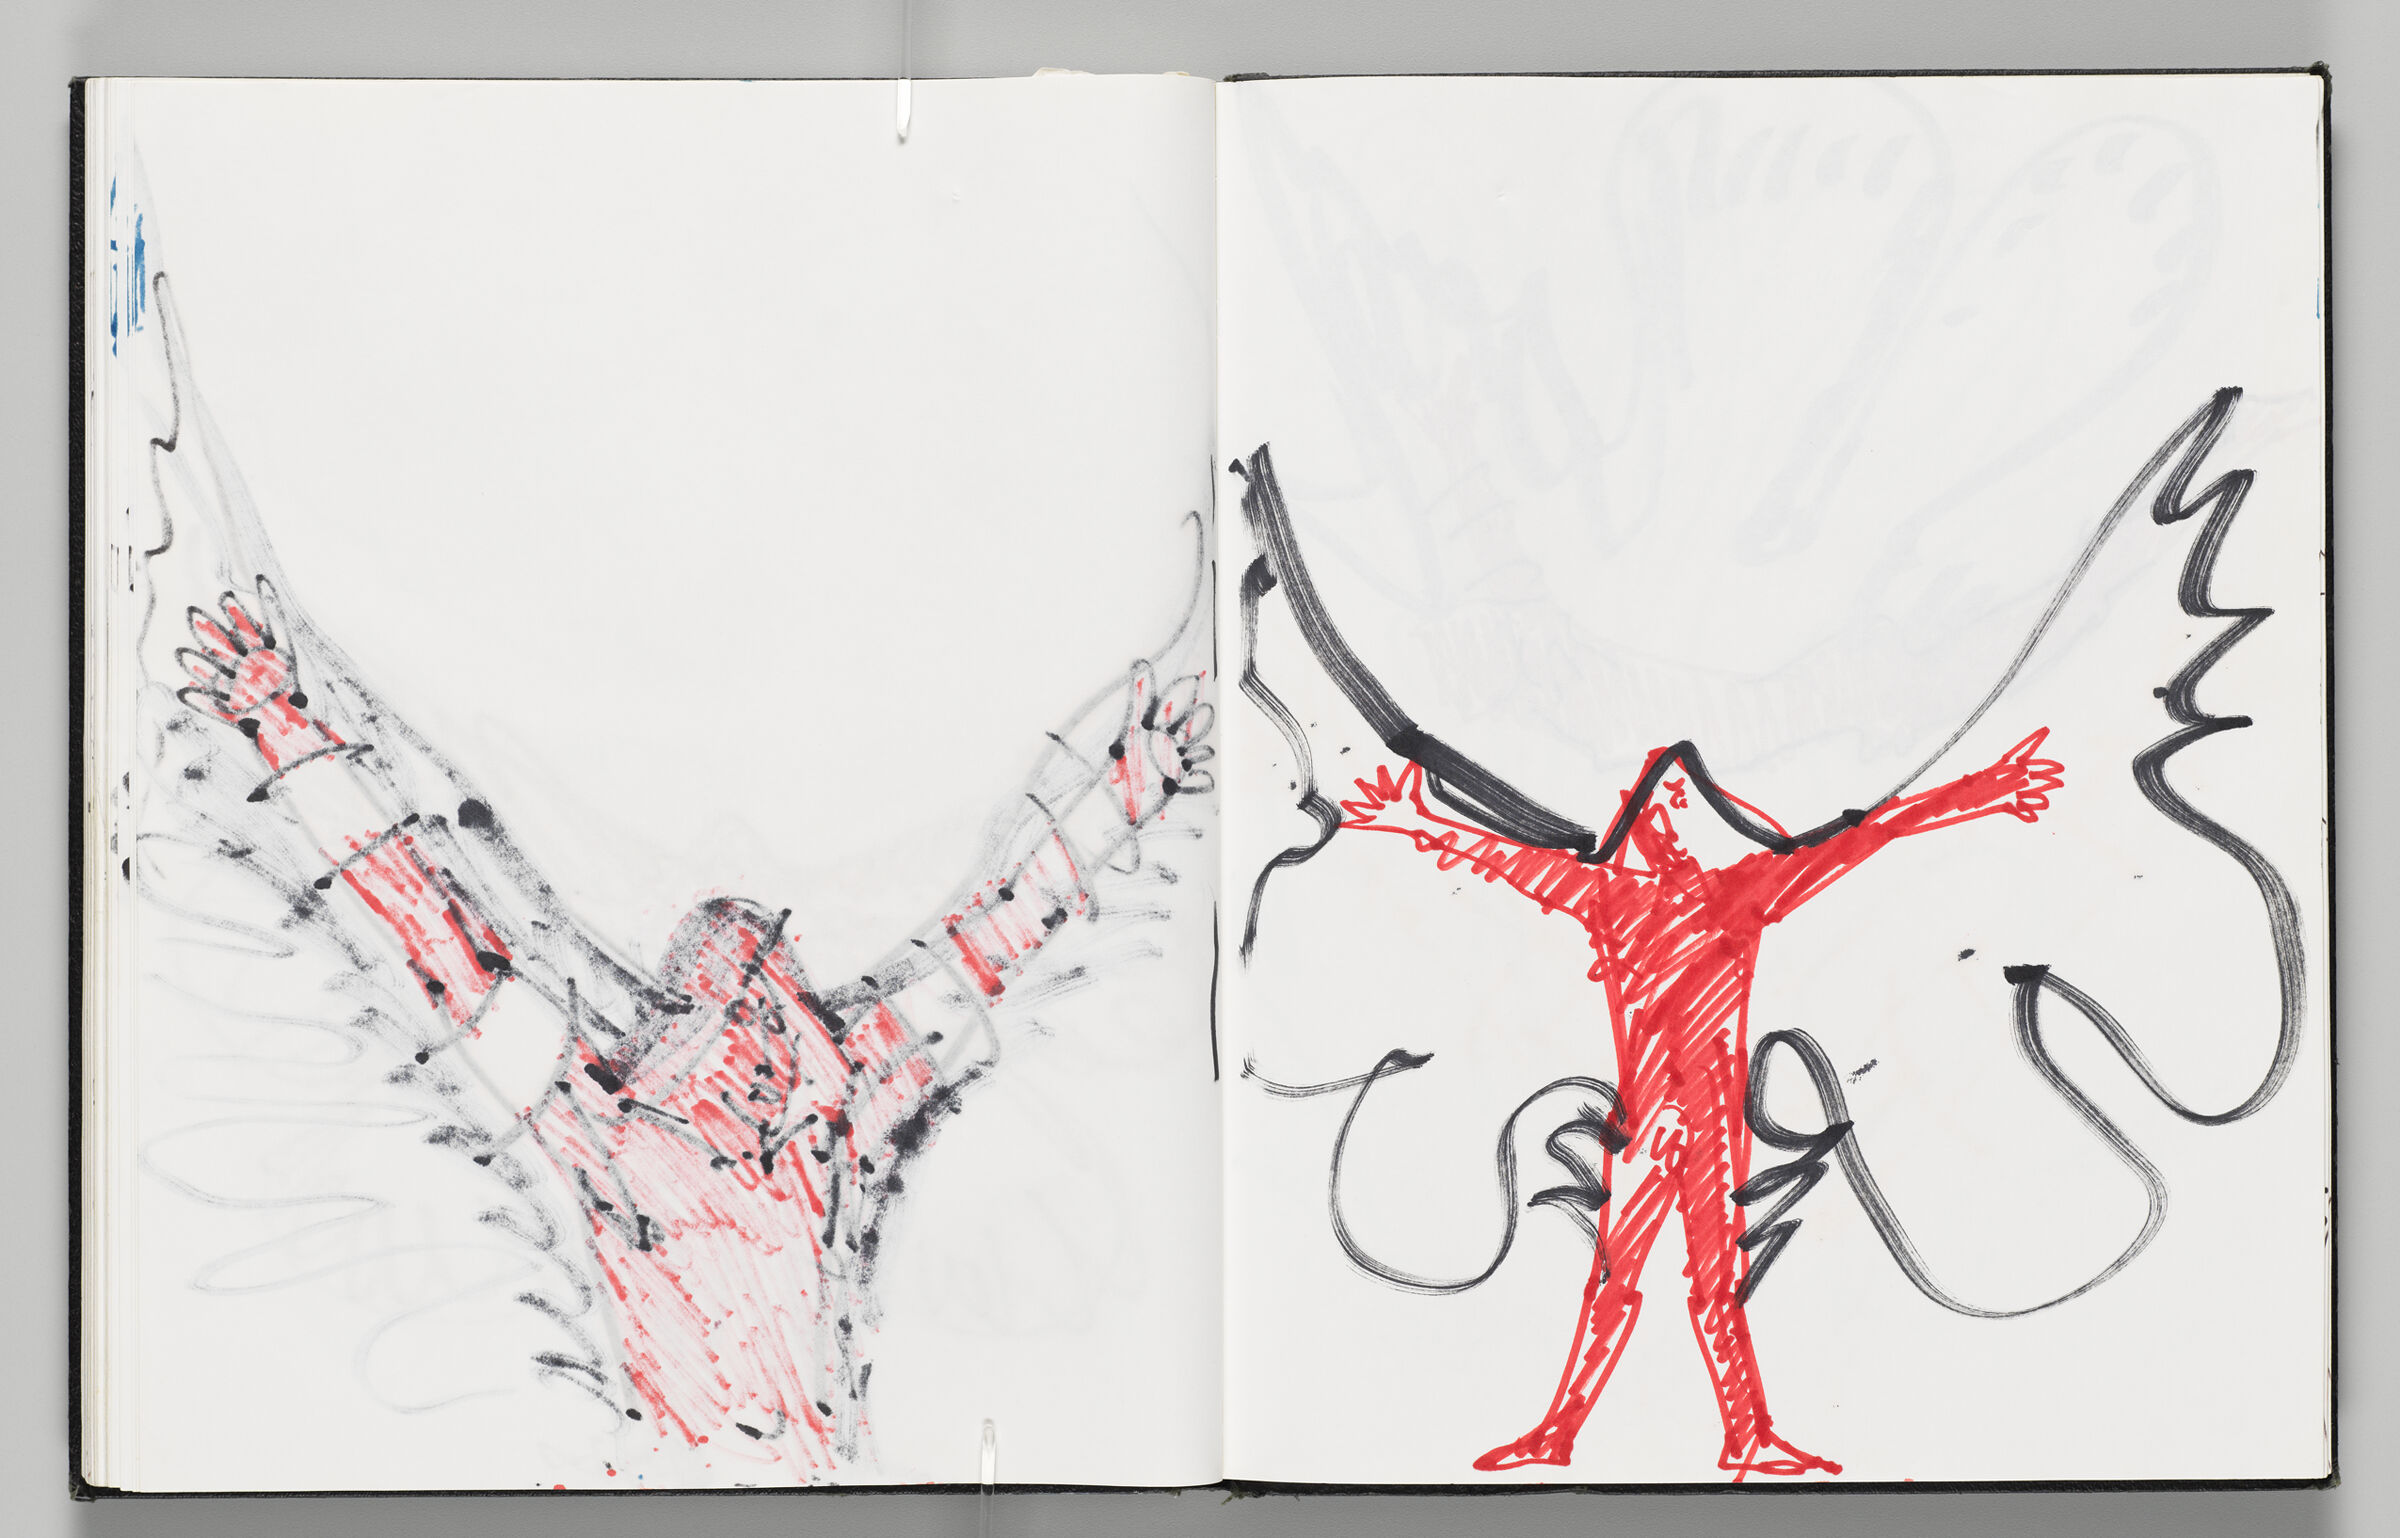 Untitled (Bleed-Through Of Previous Page, Left Page); Untitled (Sketch Of Icarus With Faint Color Transfer, Right Page)